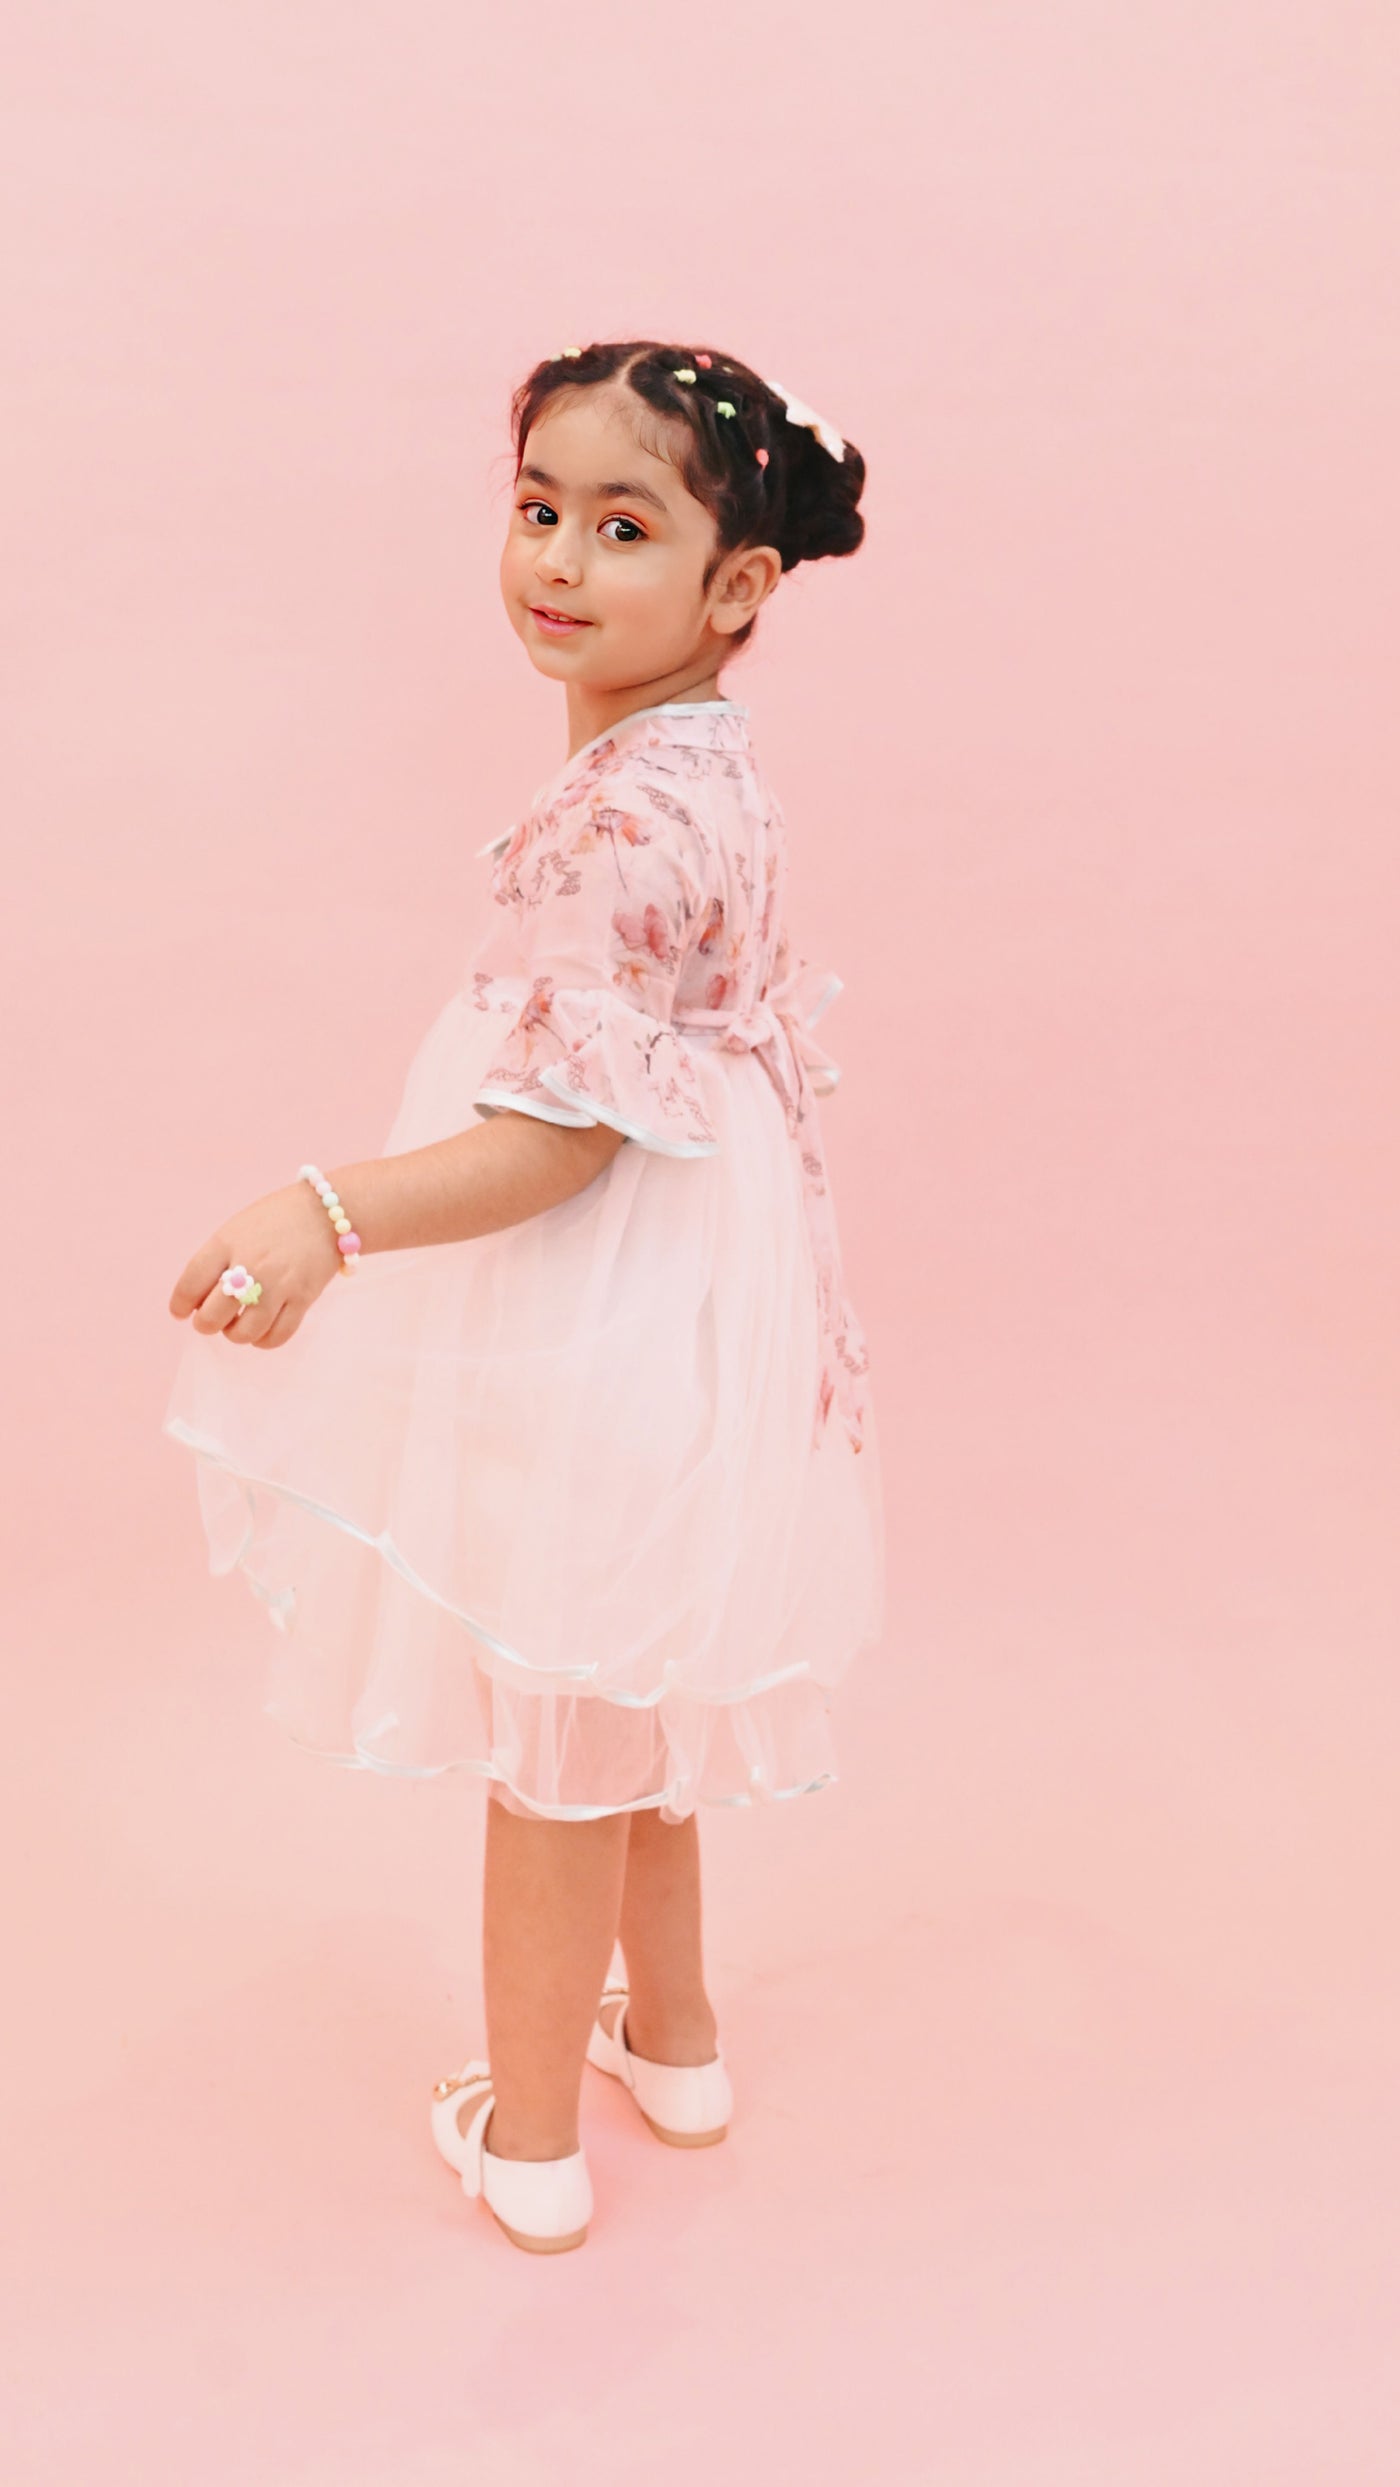 Pastel Pink Japanese Dress for your little Munchkin